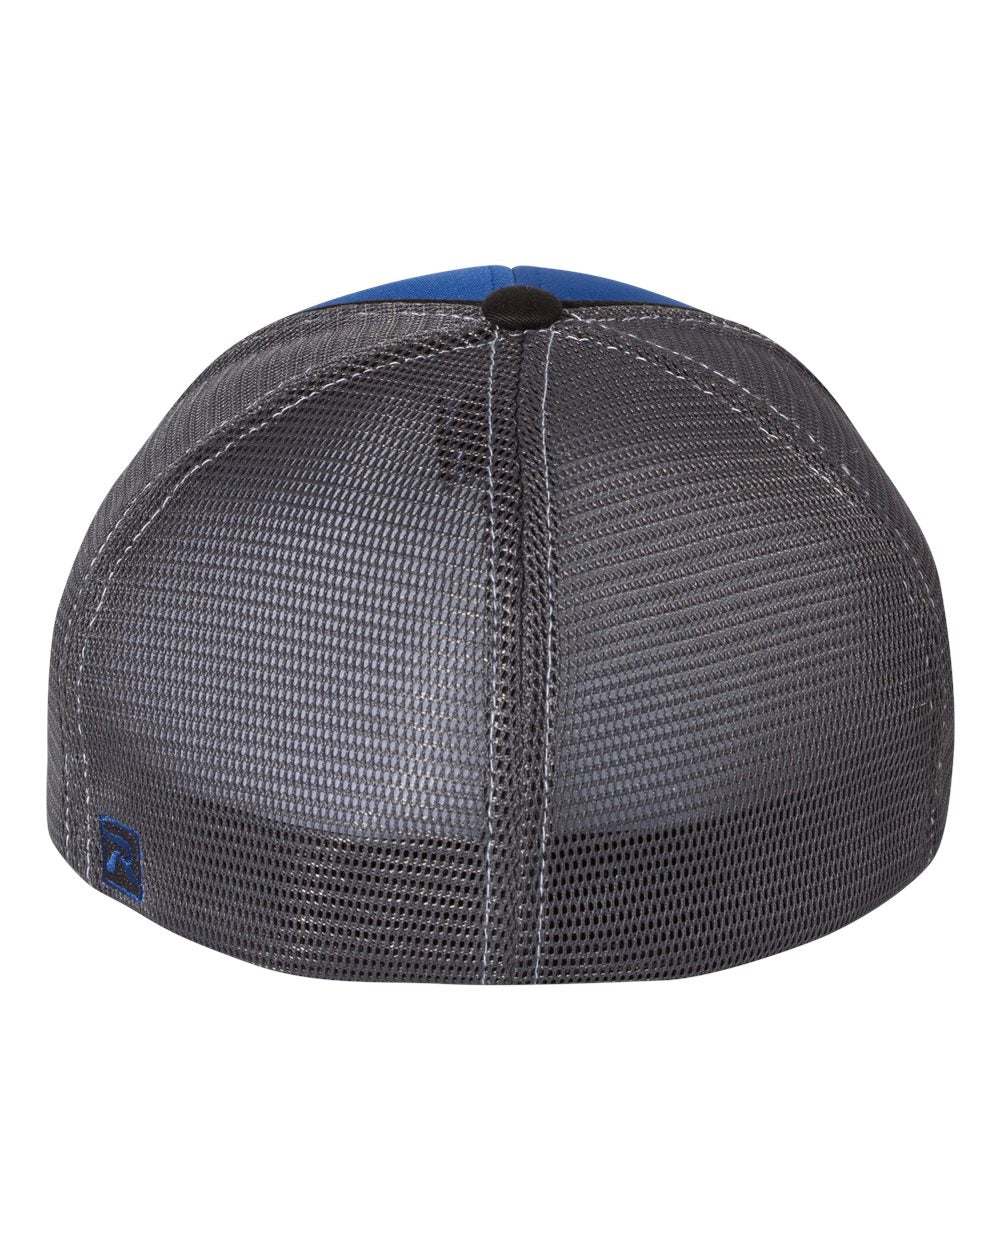 Richardson Fitted Pulse Customized Sportmesh with R-Flex Caps, Royal Charcoal Black Tri